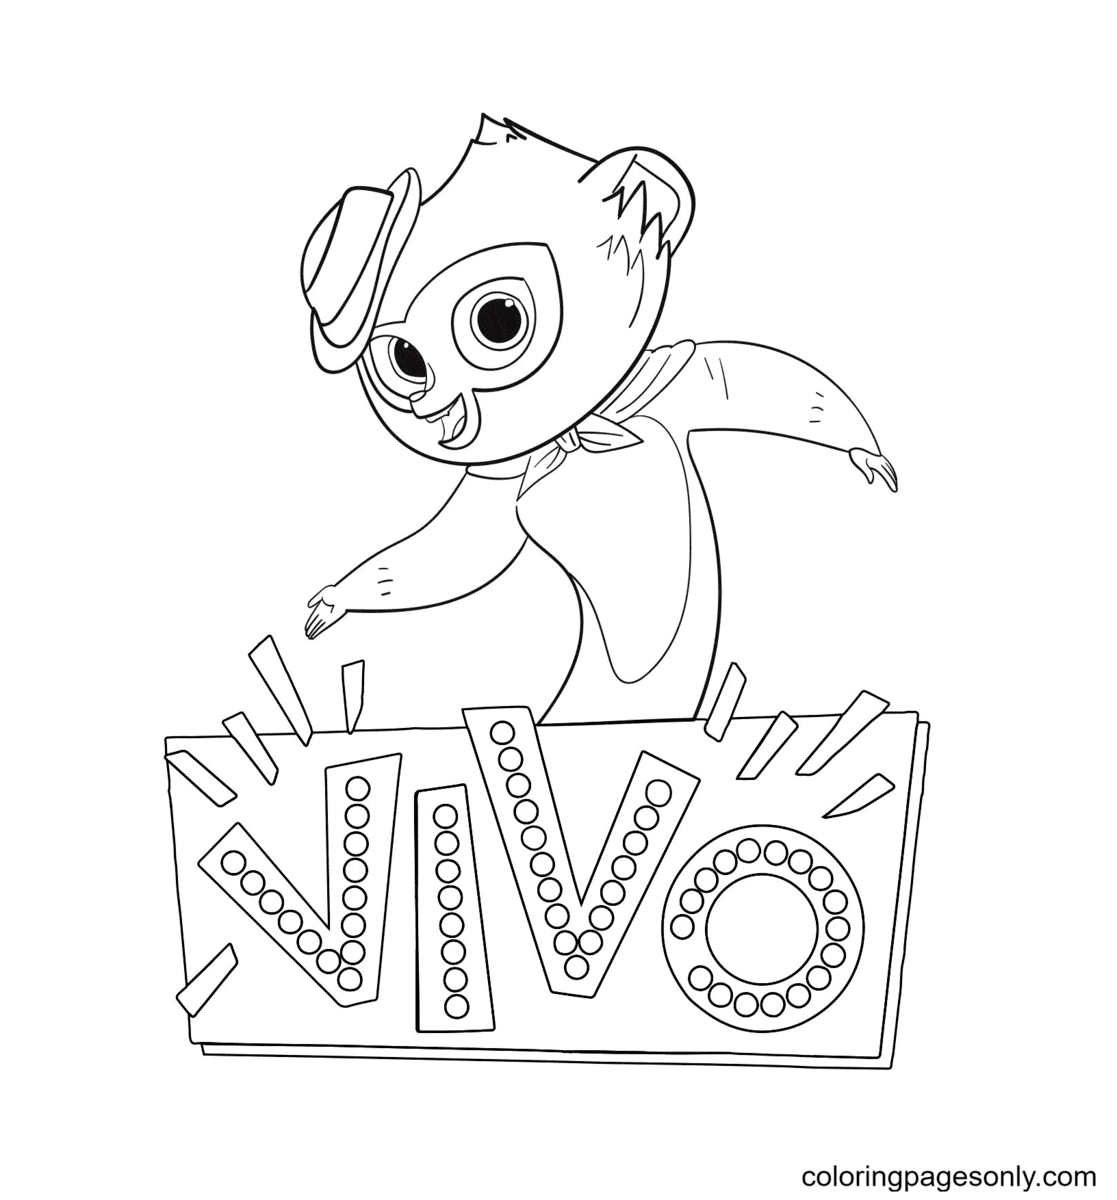 Vivo Dancing Coloring Pages